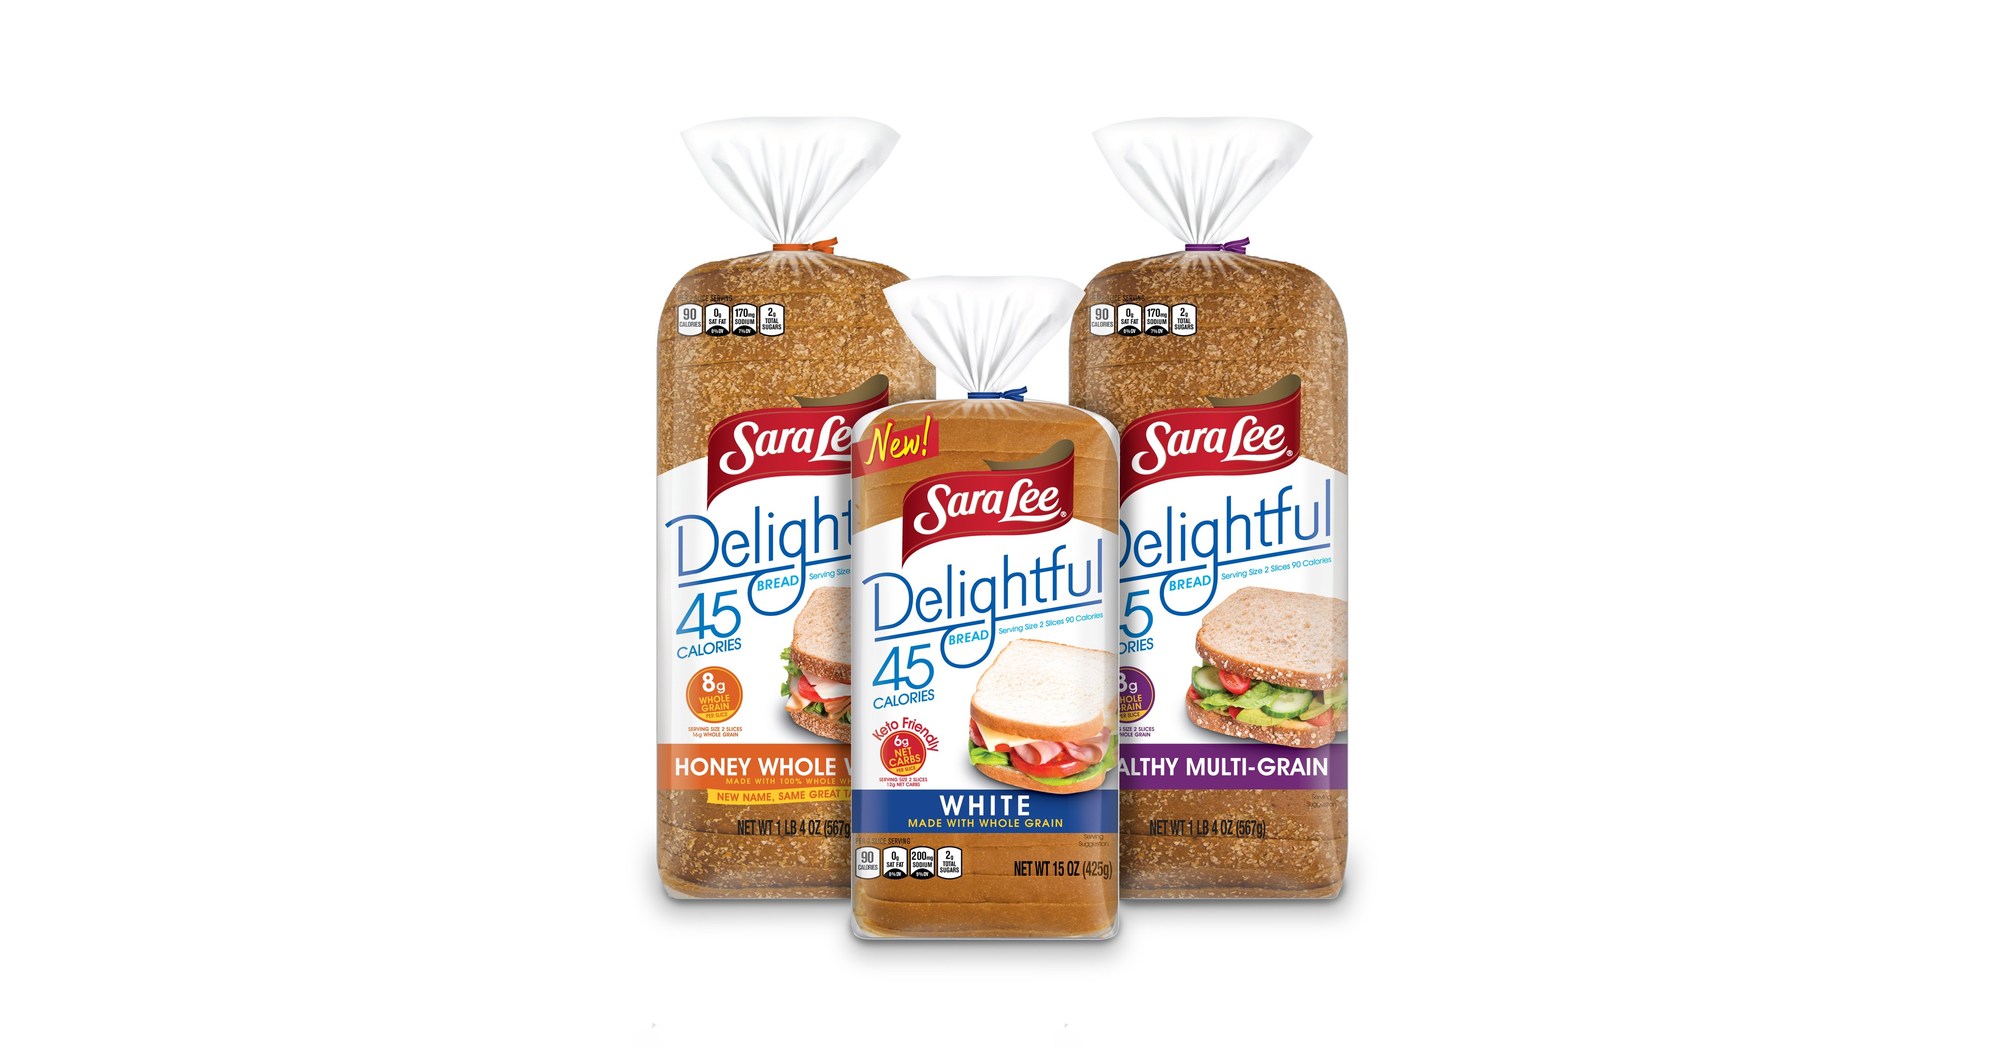 Sara Lee® Introduces New Delightful® White Made with Whole Grain Bread